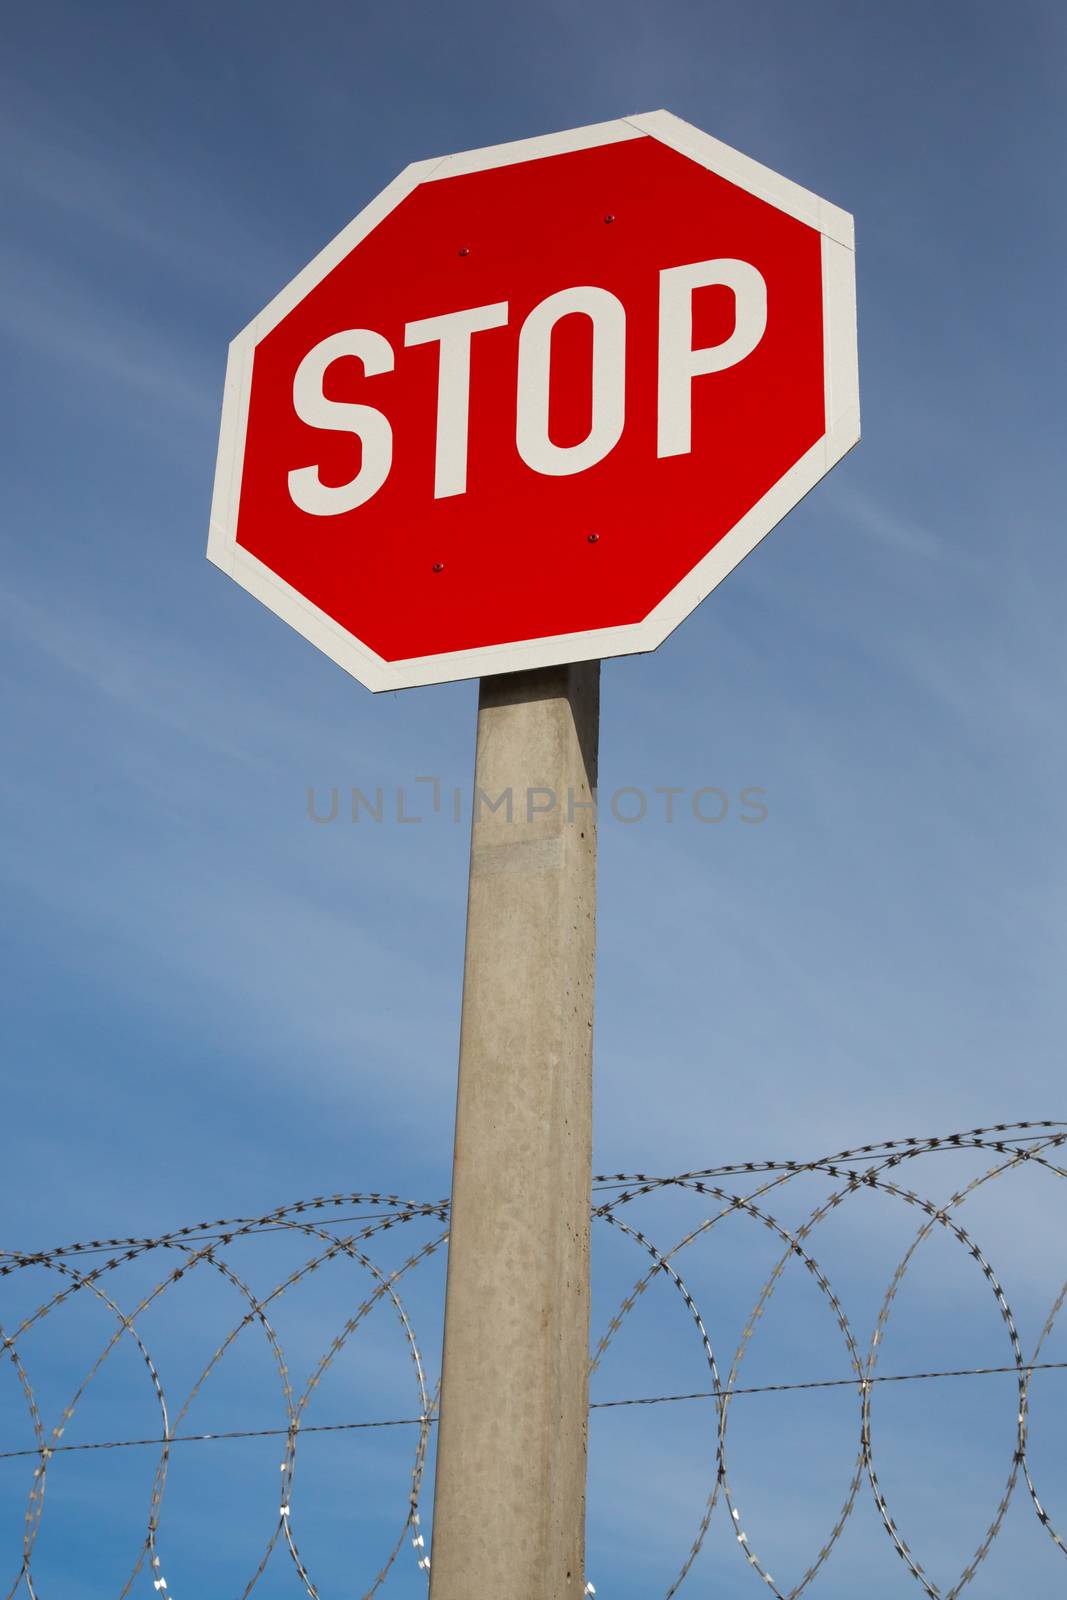 Bright red stop sign against blue sky and razor wire coil